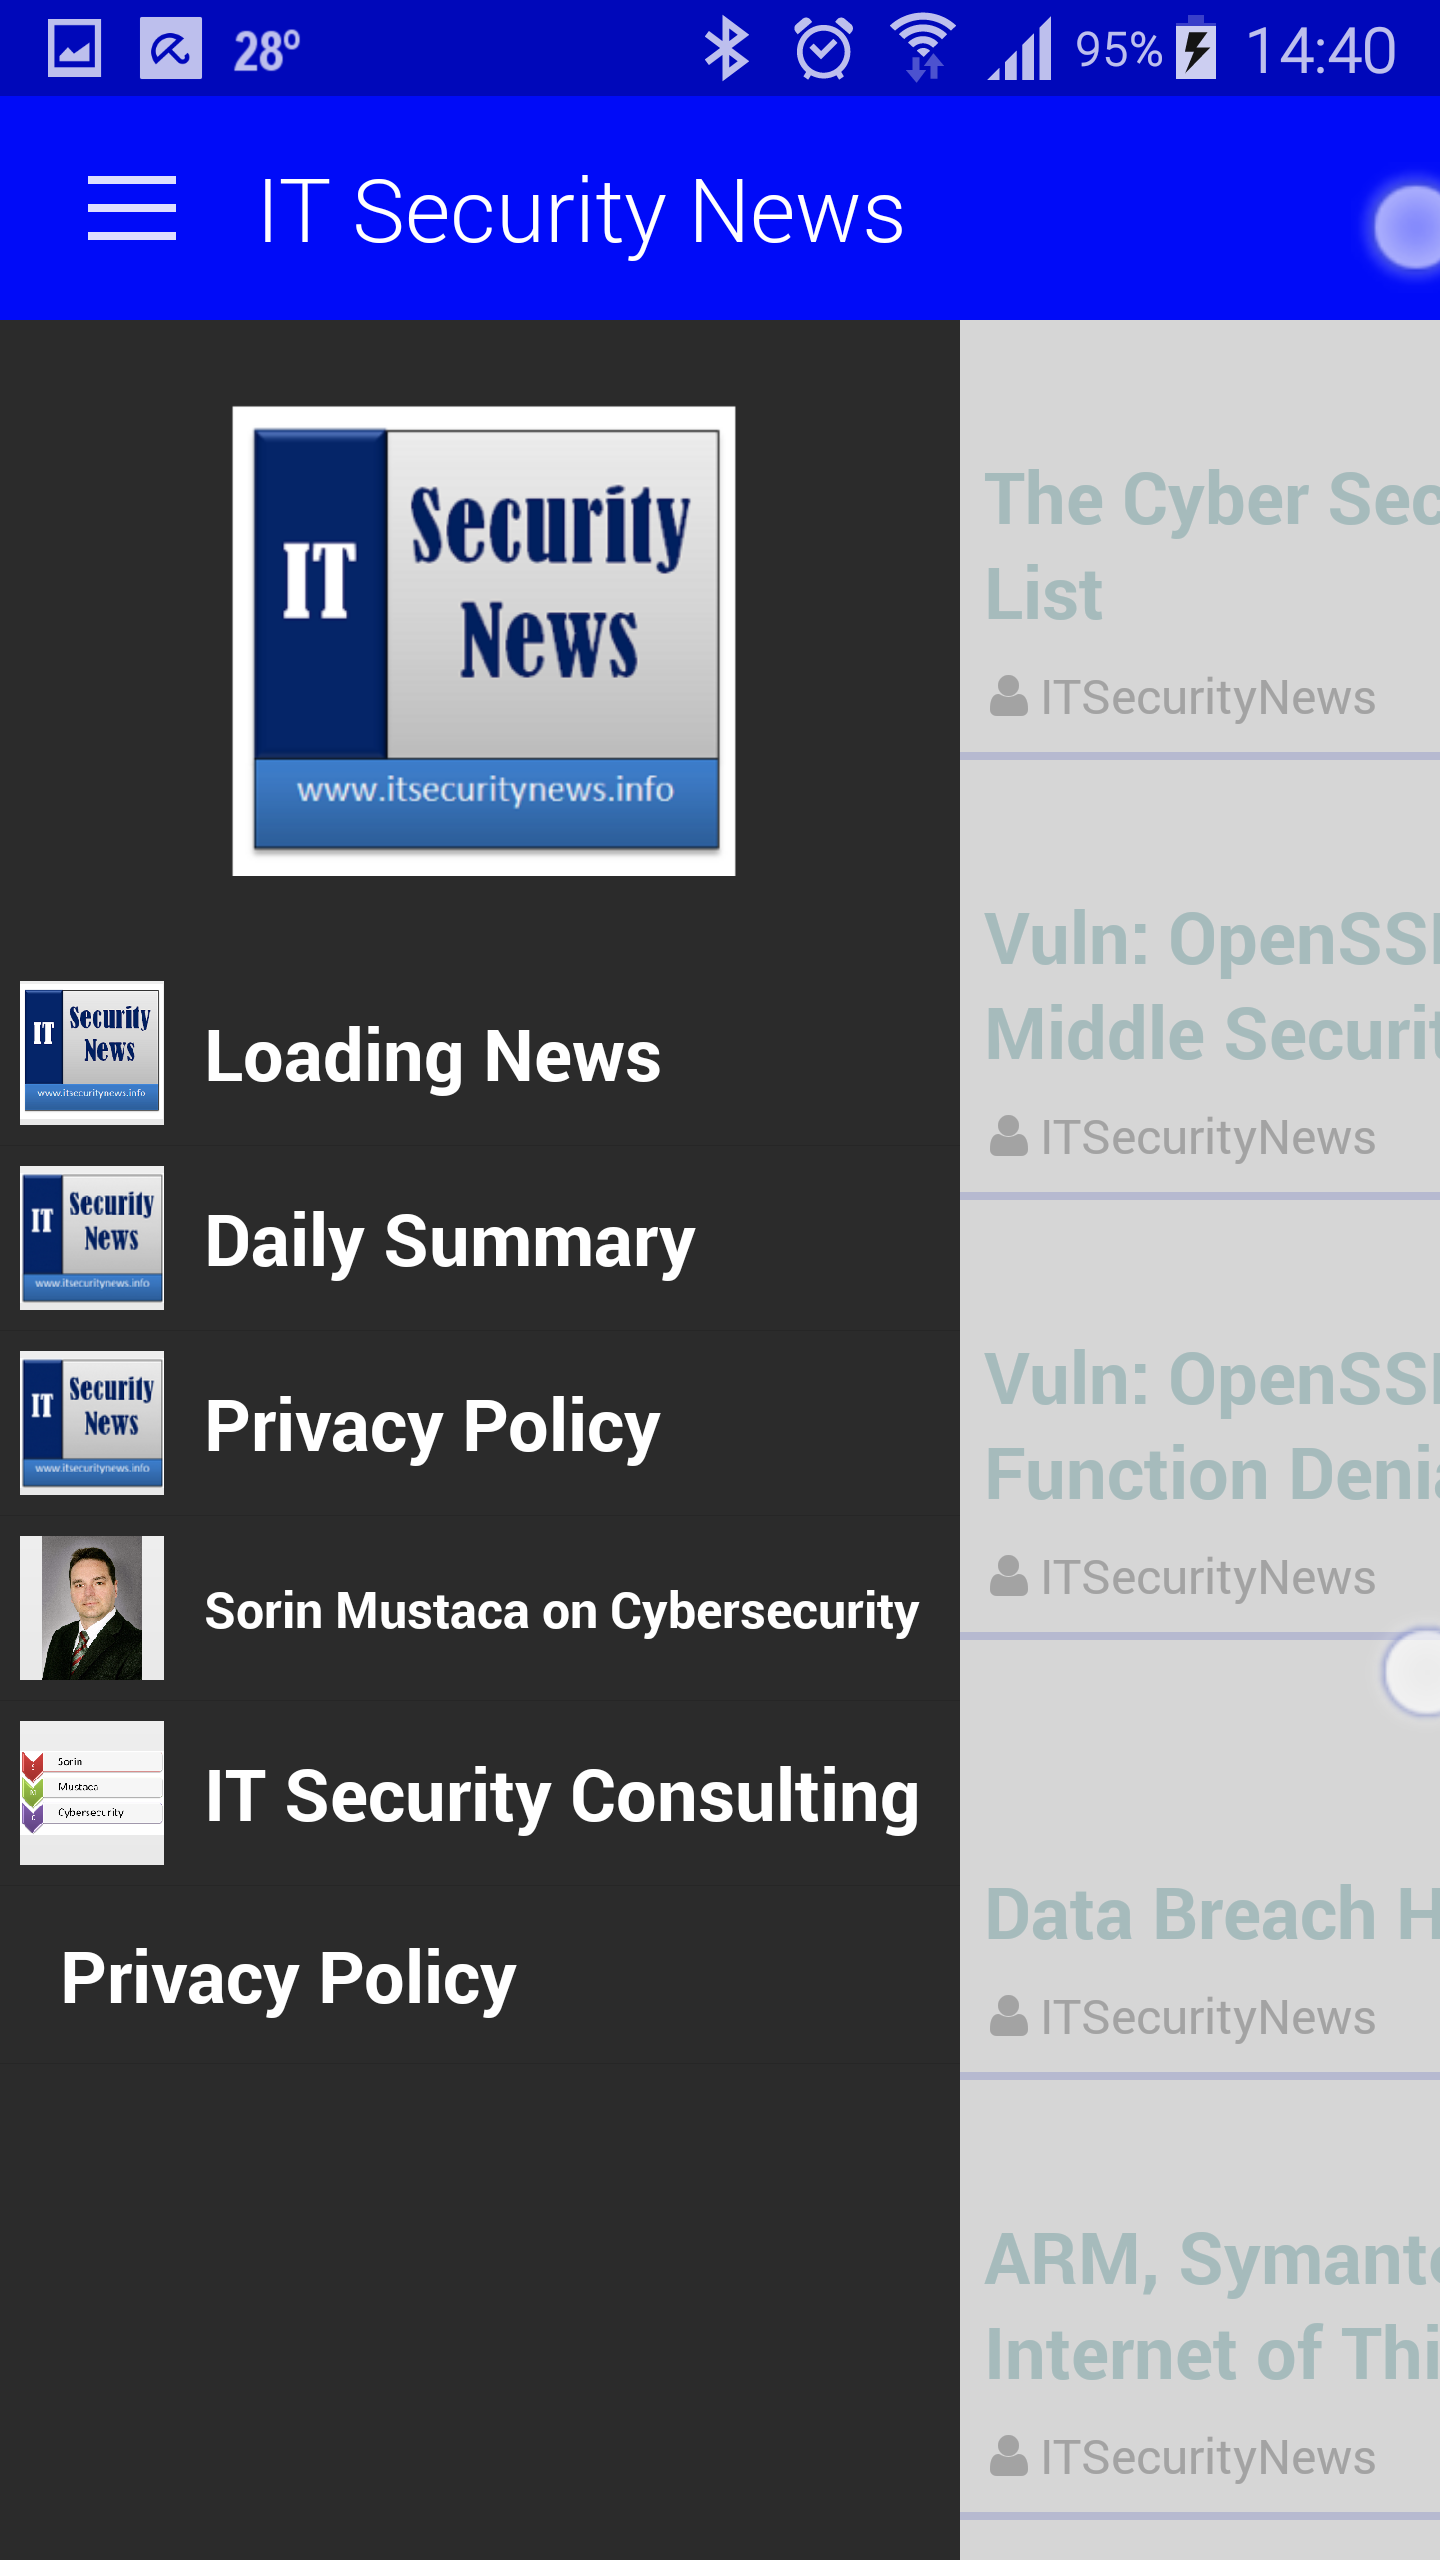 IT Security News has its own Android App